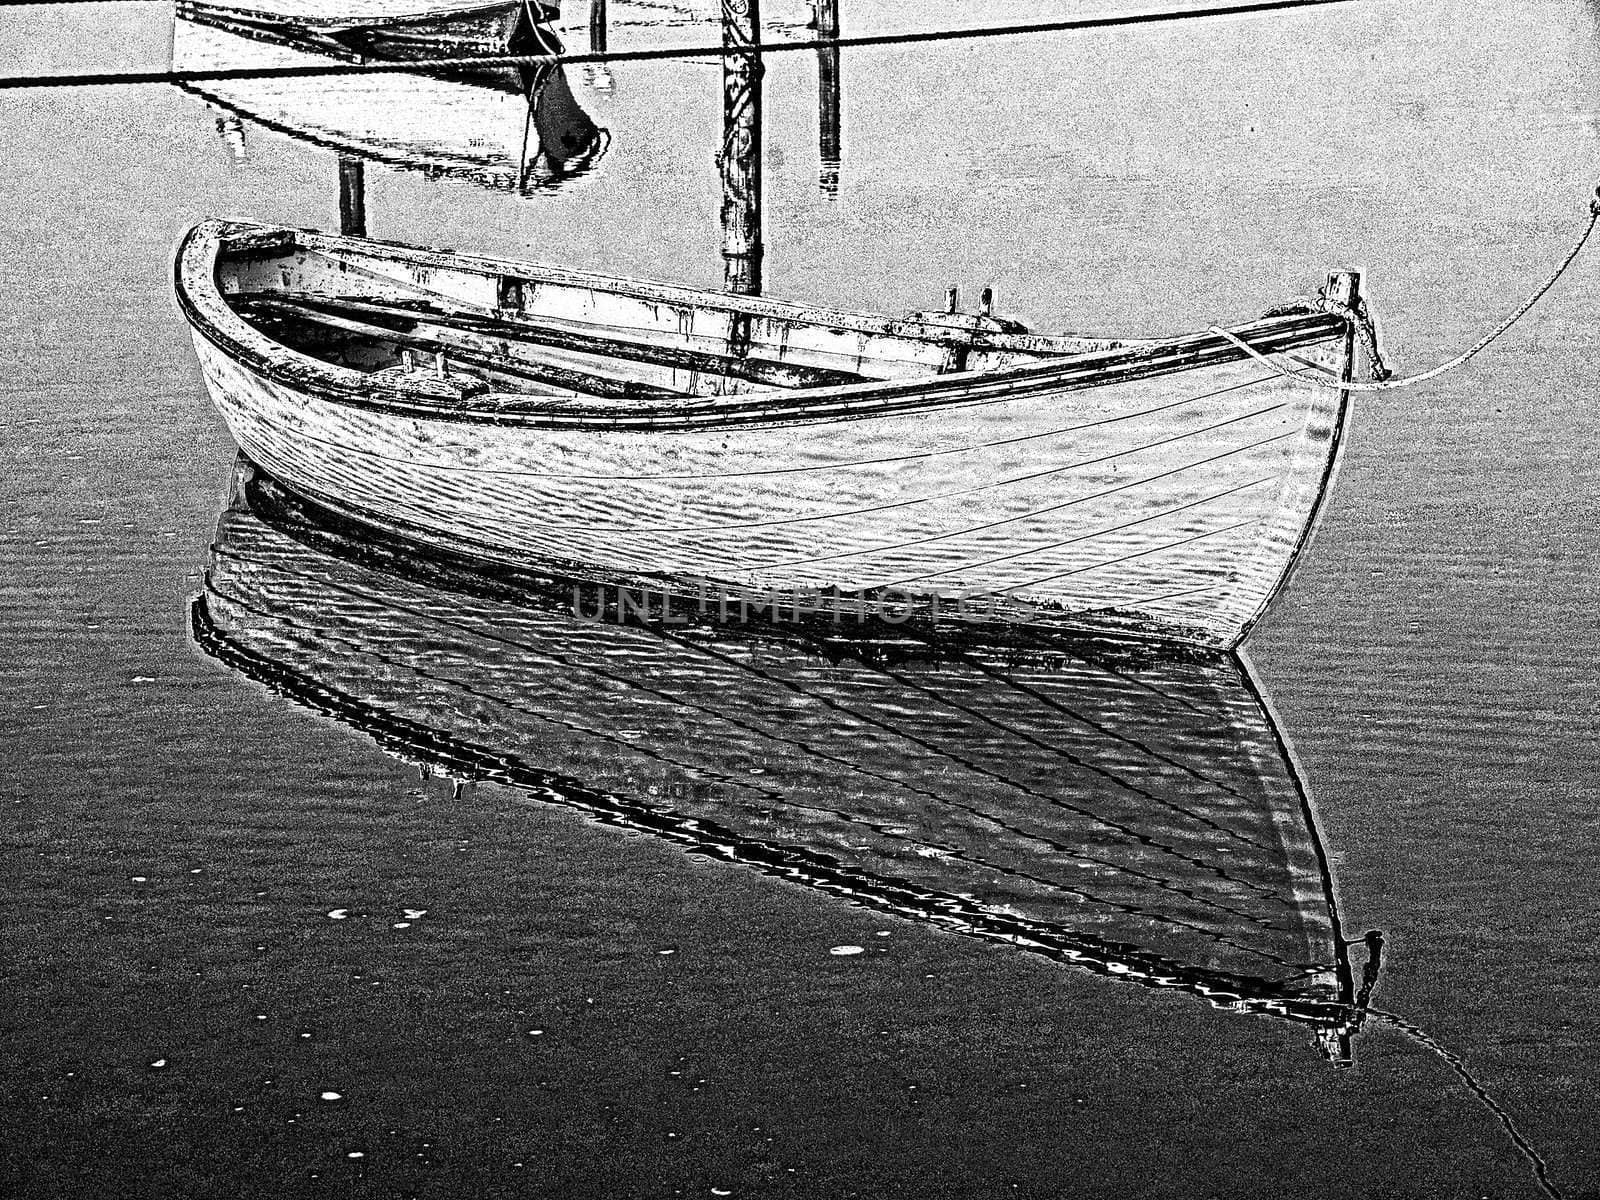 Small dinghy dory floating in the water digital art manipulation by Ronyzmbow